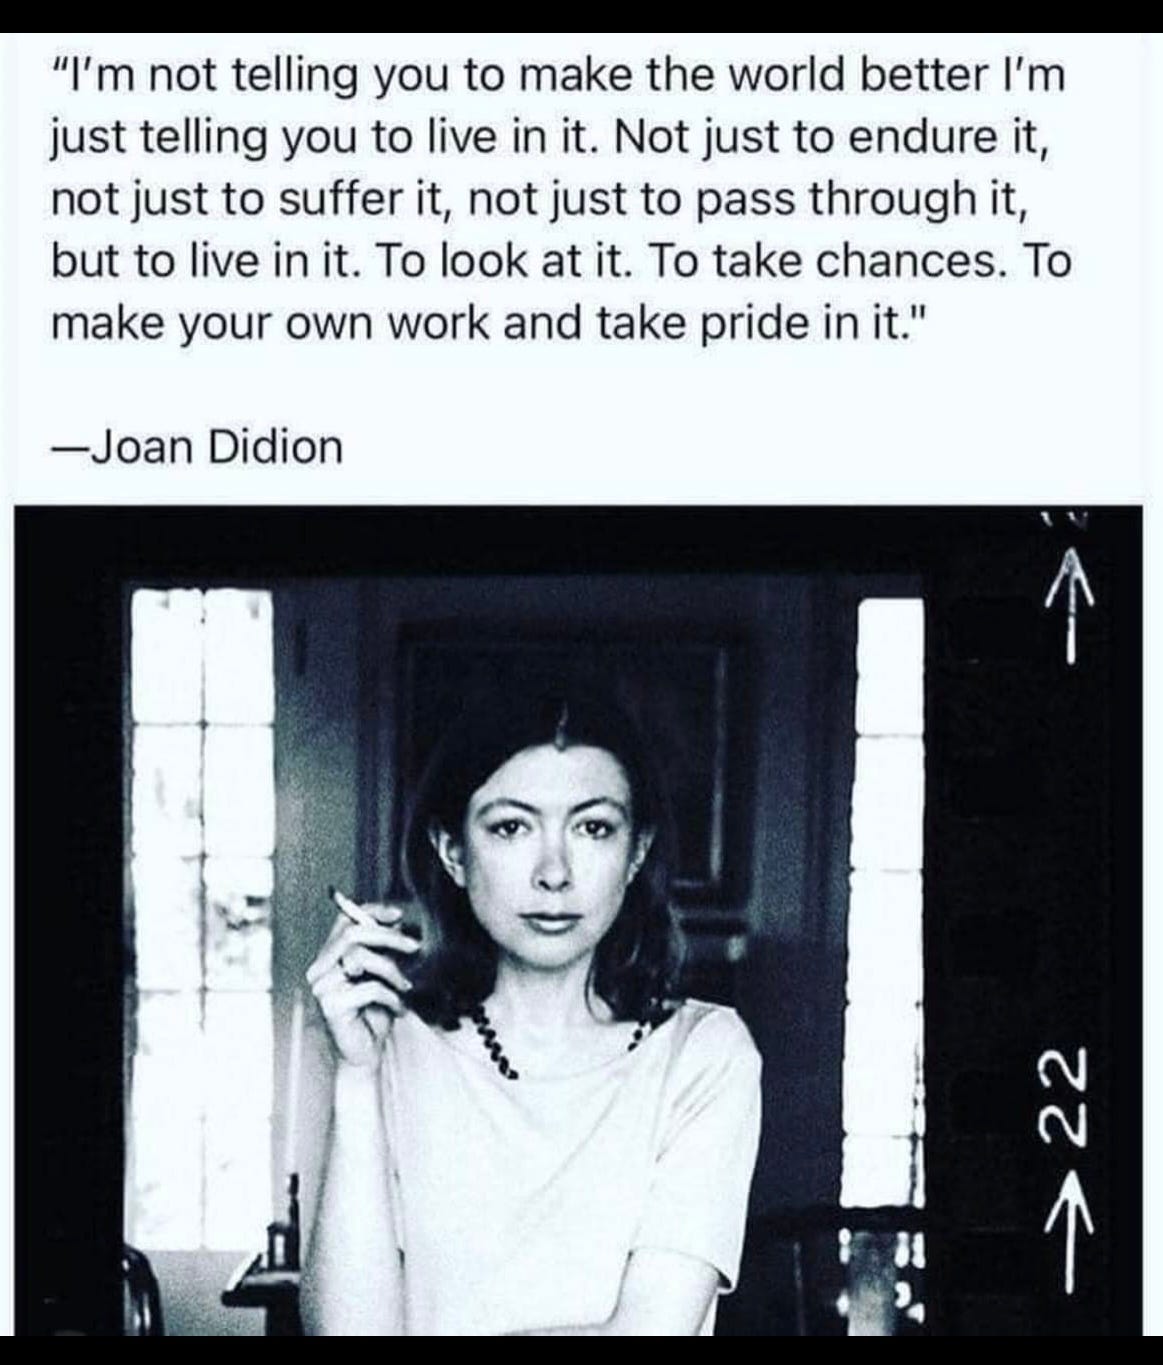 “I’m not telling you to make the world better I’m just telling you to live in it. Not just to endure it, not just to suffer it, not just to pass through it, but to live in it. To look at it. To take chances. To make your own work and take pride in it.” a Joan Didion quote, with a black and white picture of her smoking as a young woman.